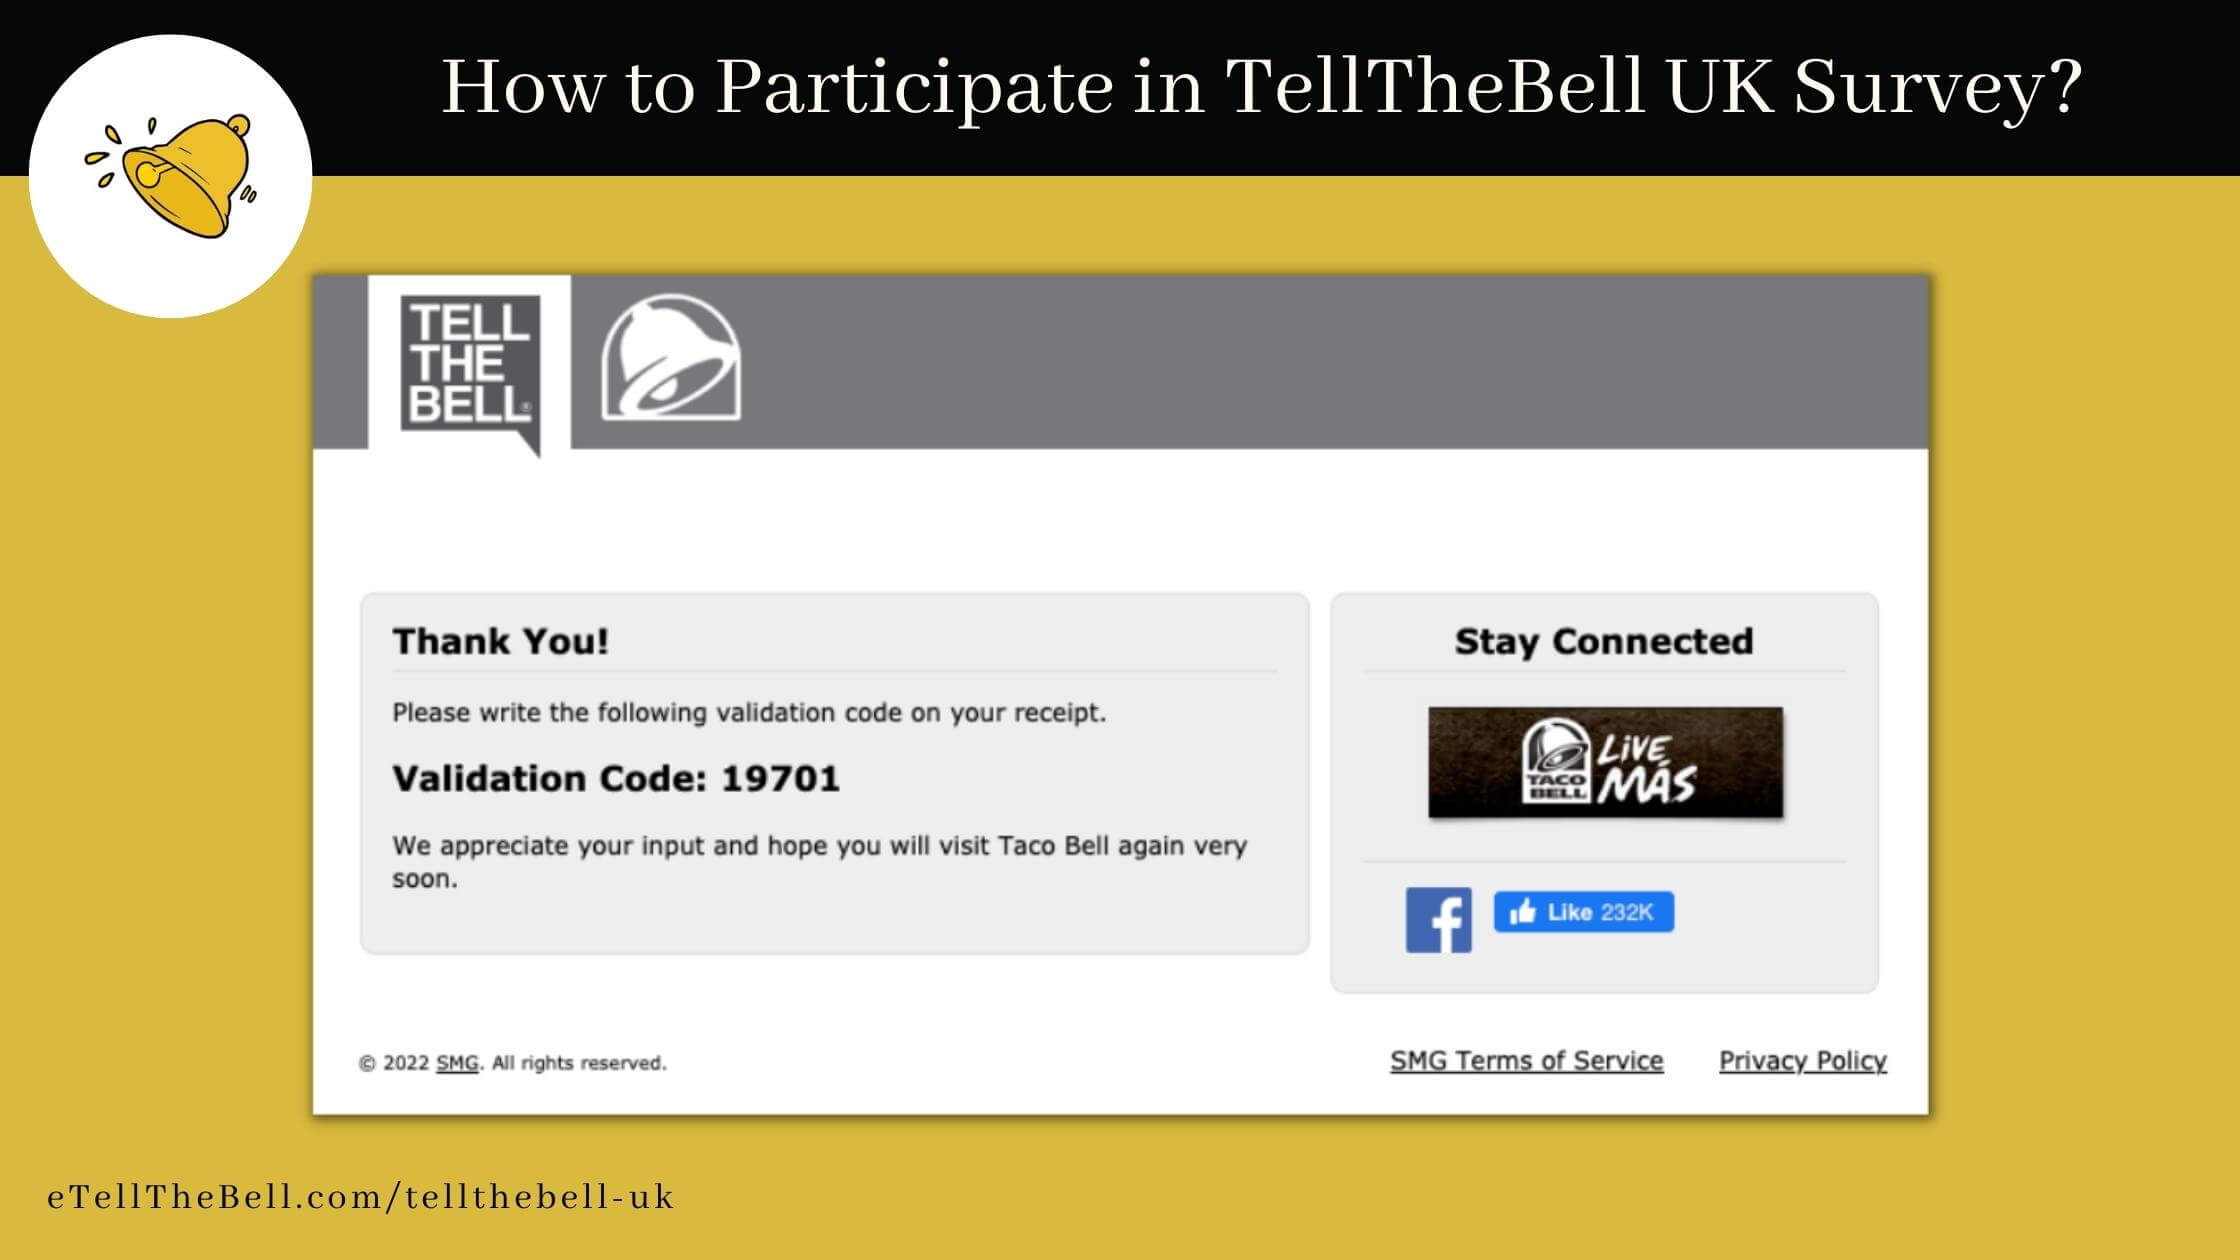 Congratulations for Participating into the TellTheBell UK Survey